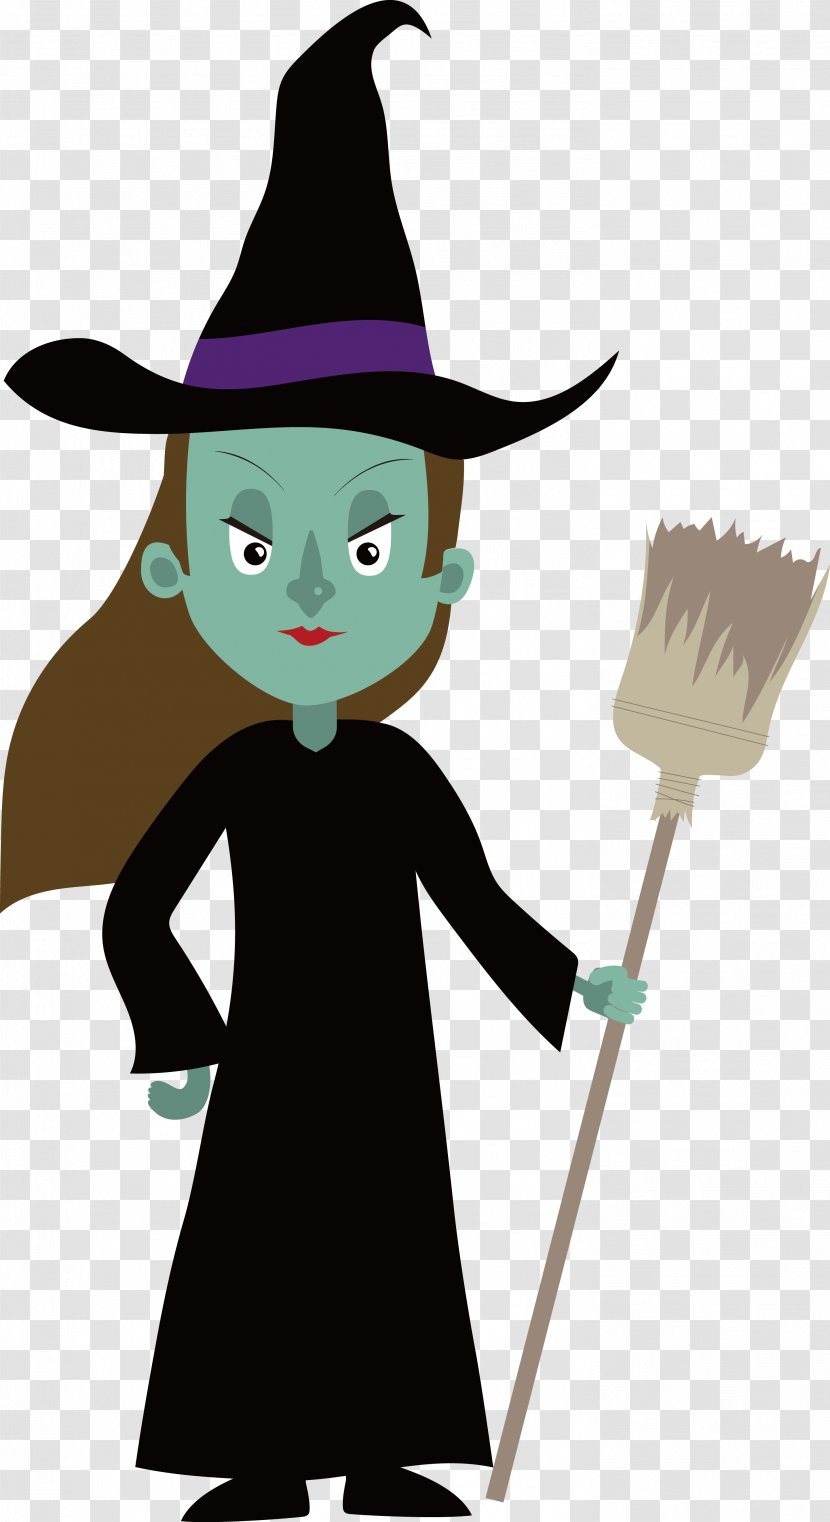 Boszorkxe1ny Disguise Halloween Illustration - Party - Black Witch Vector Transparent PNG